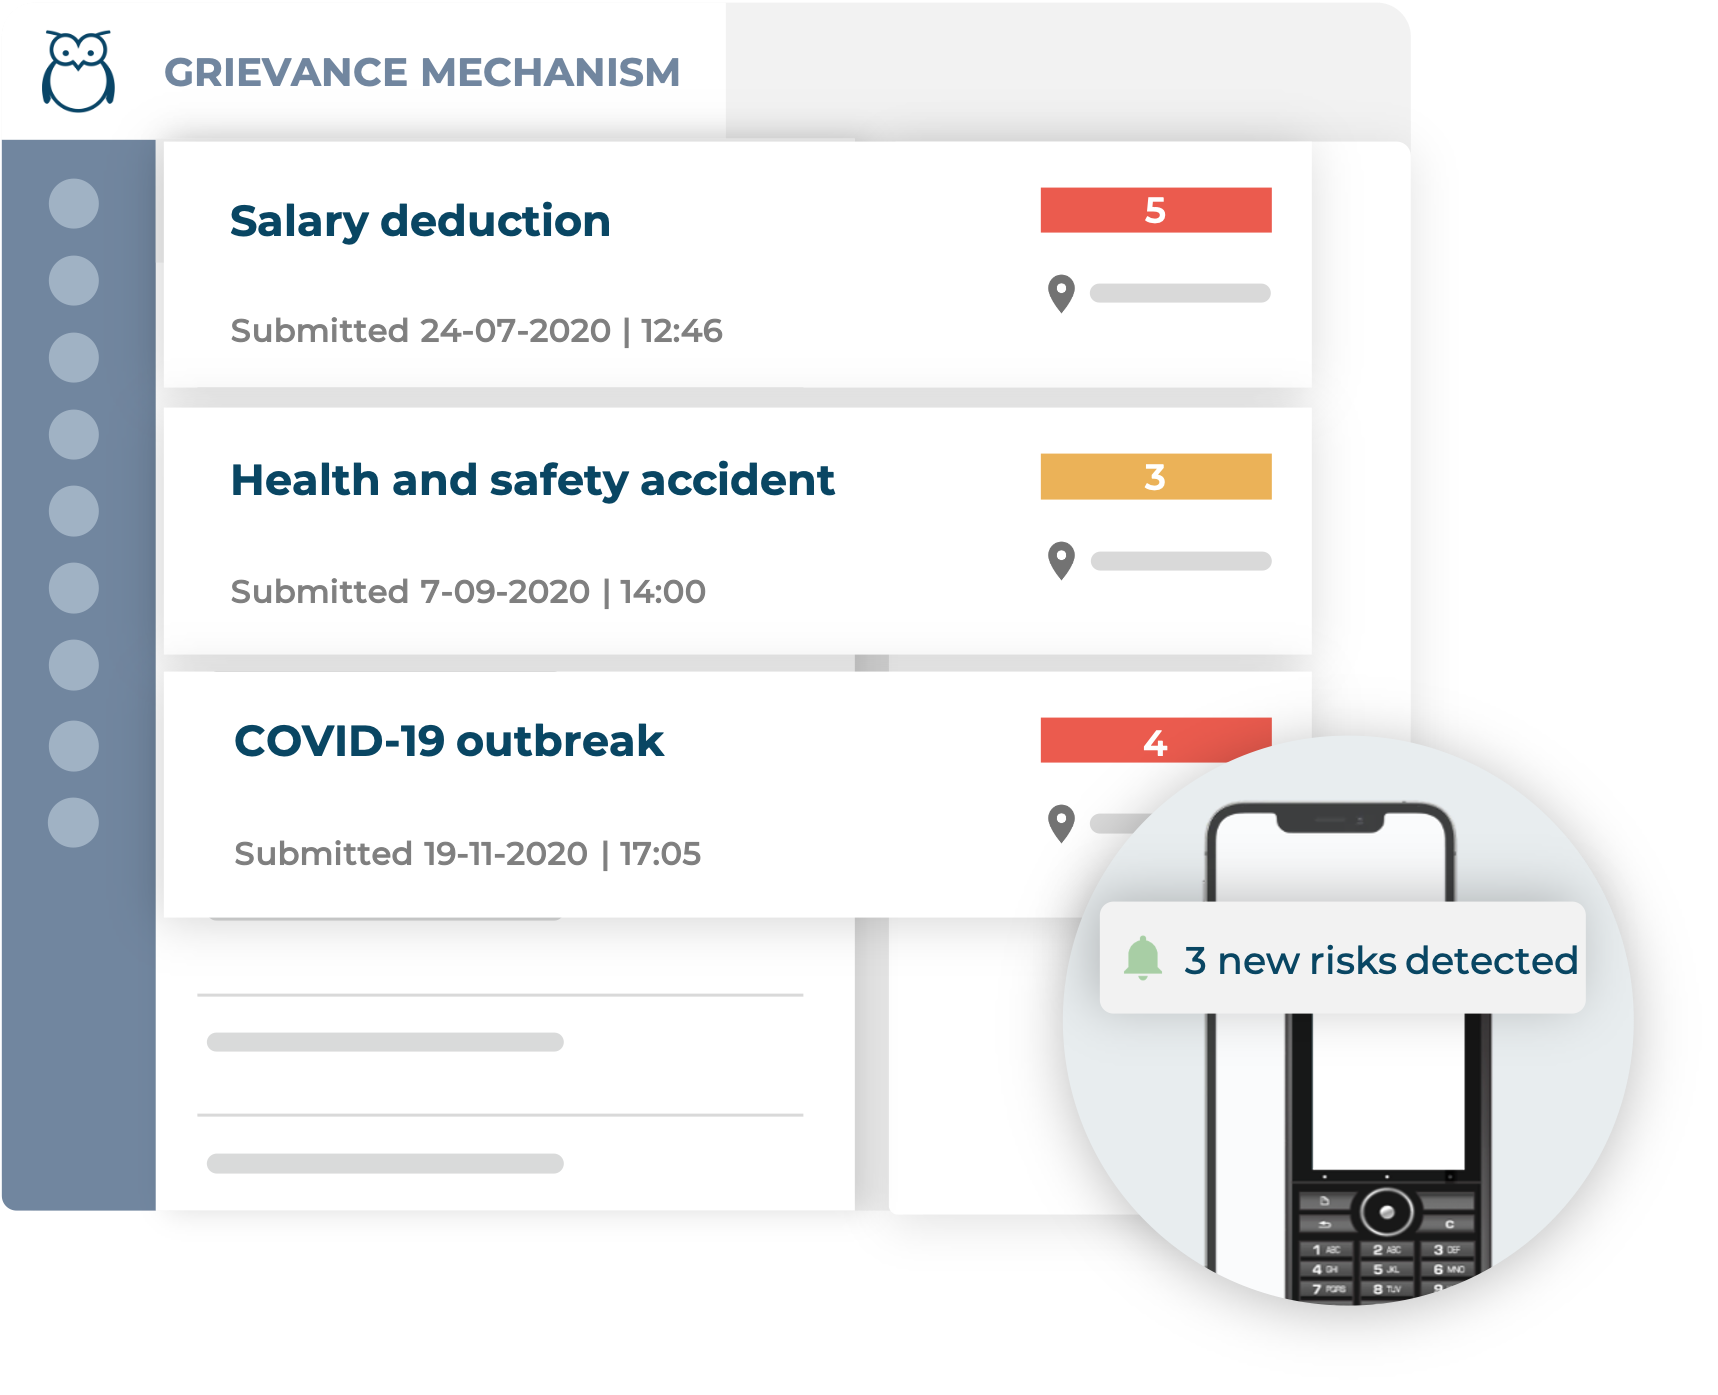 Ulula's grievance mechanism displaying a list of submitted grievances of varying risk levels and mobile phones showing a notification